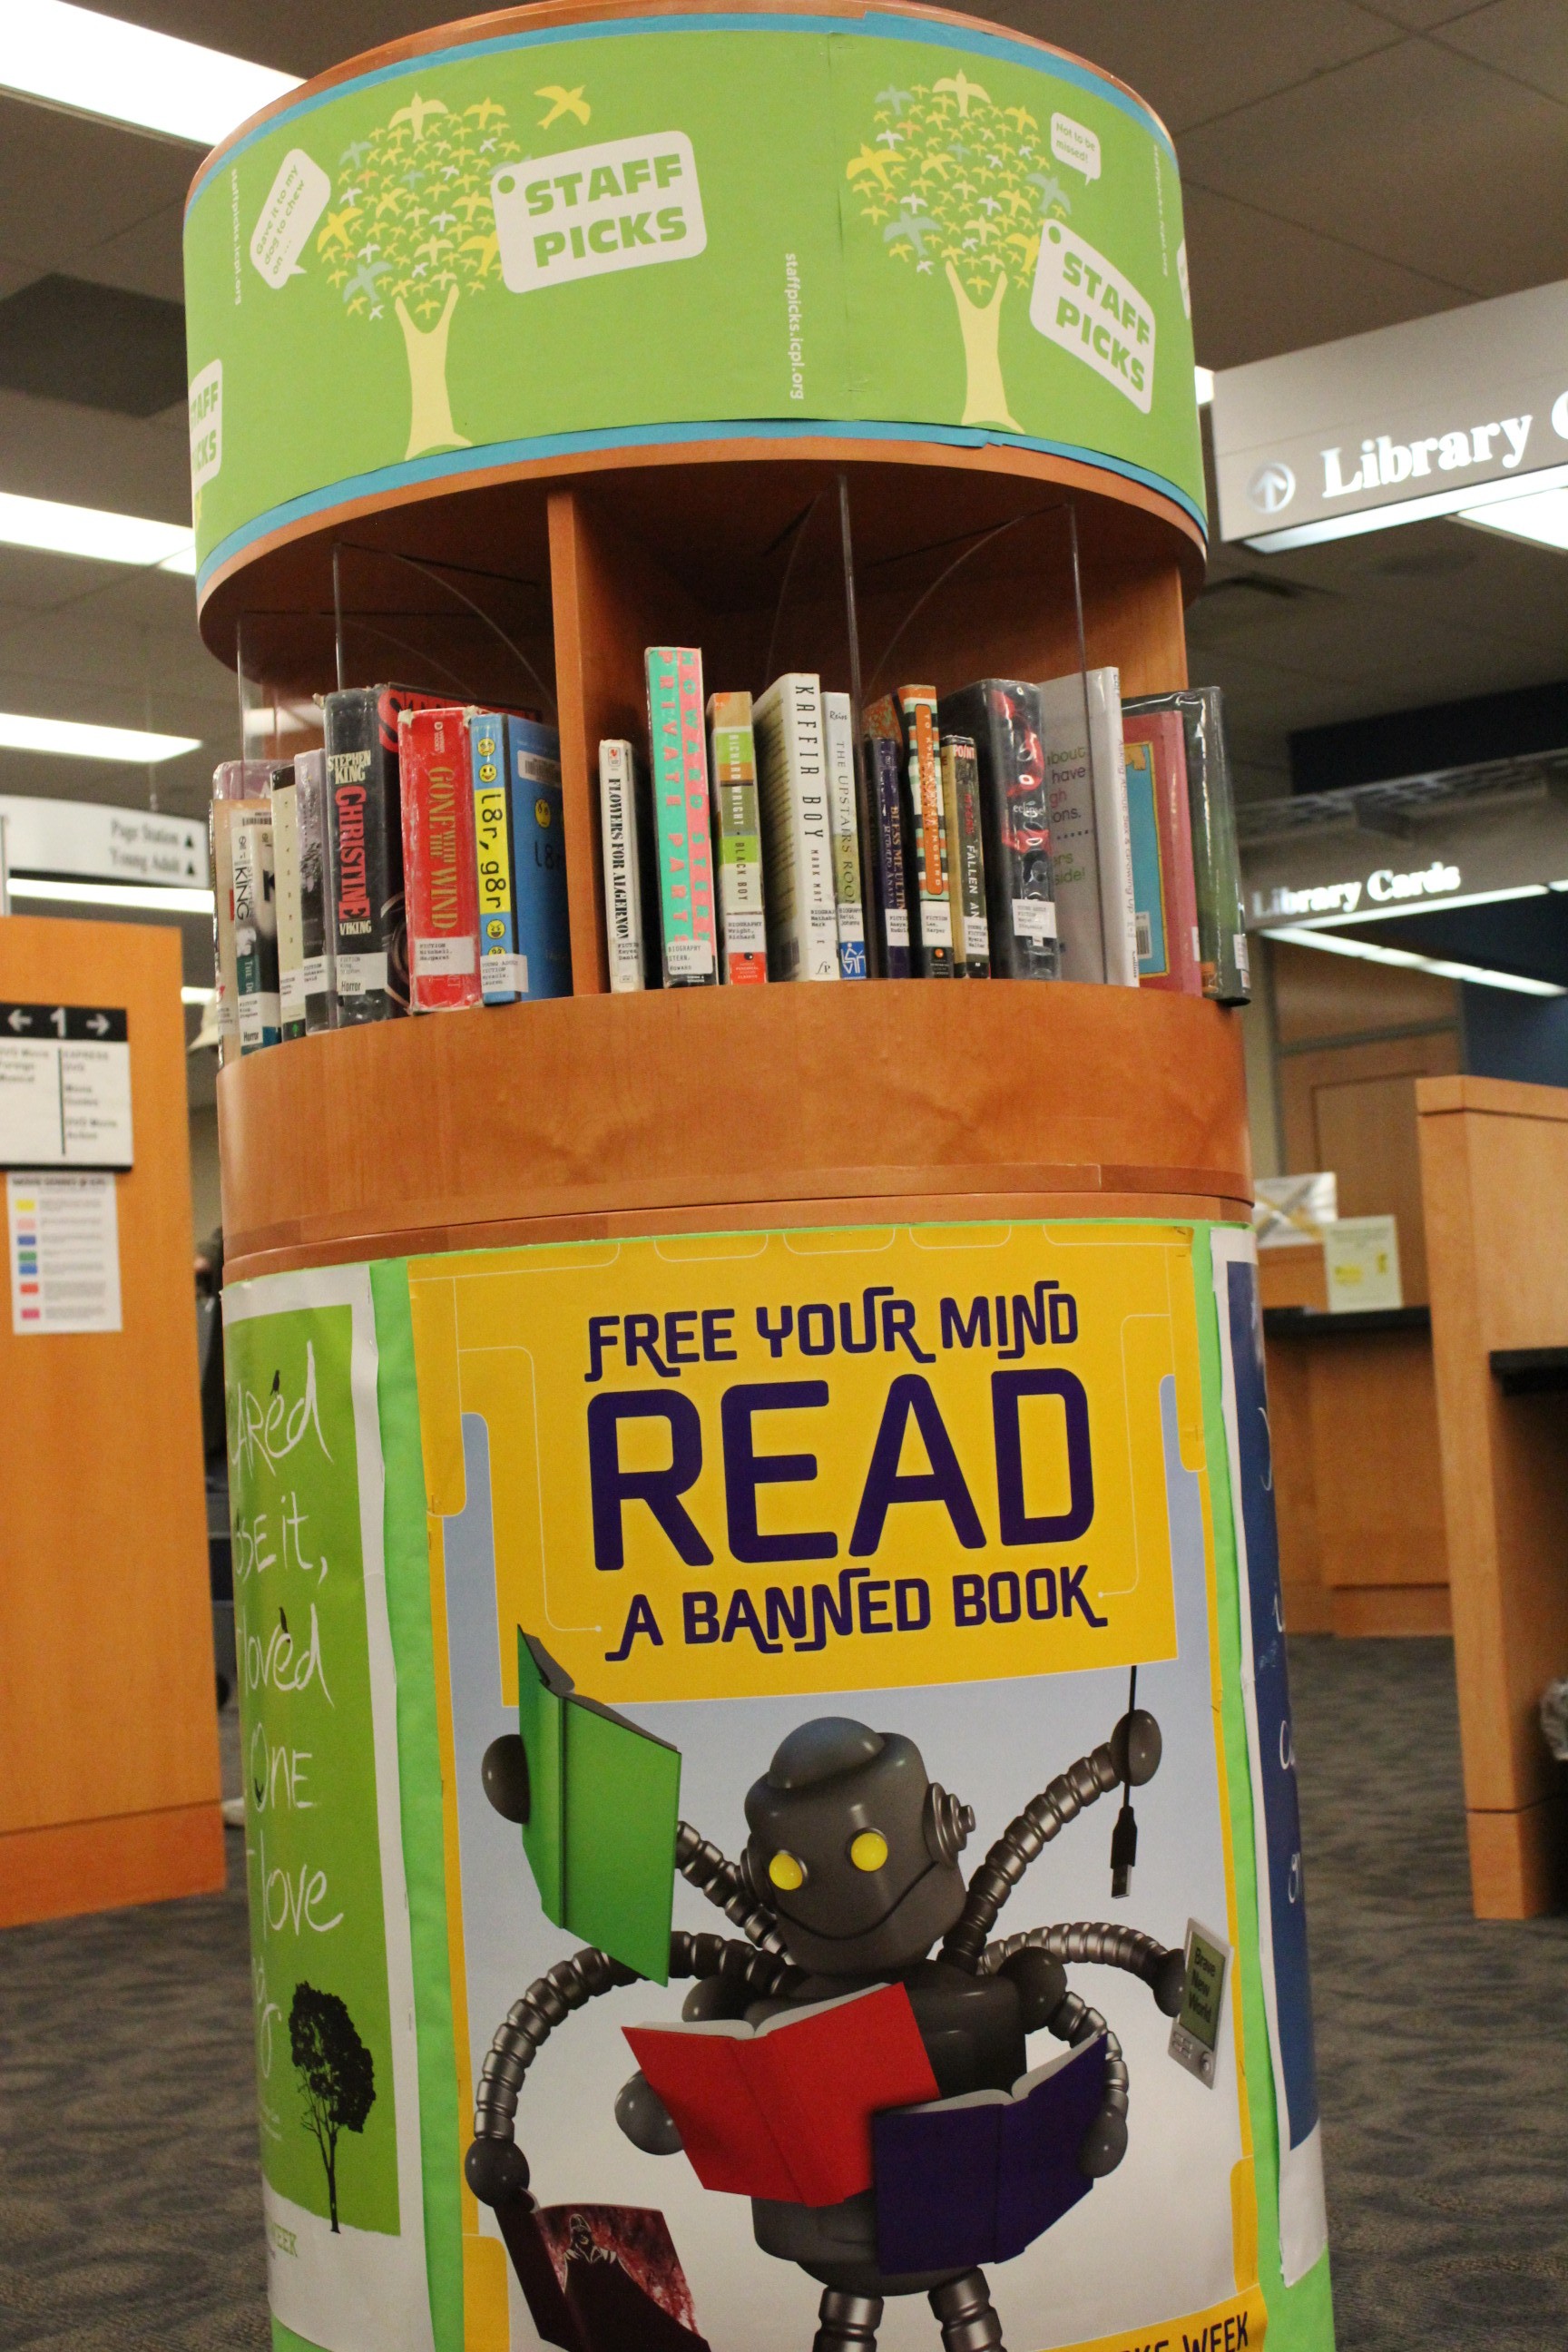 Iowa City (Iowa) Public Library uses theme posters for its circular display.